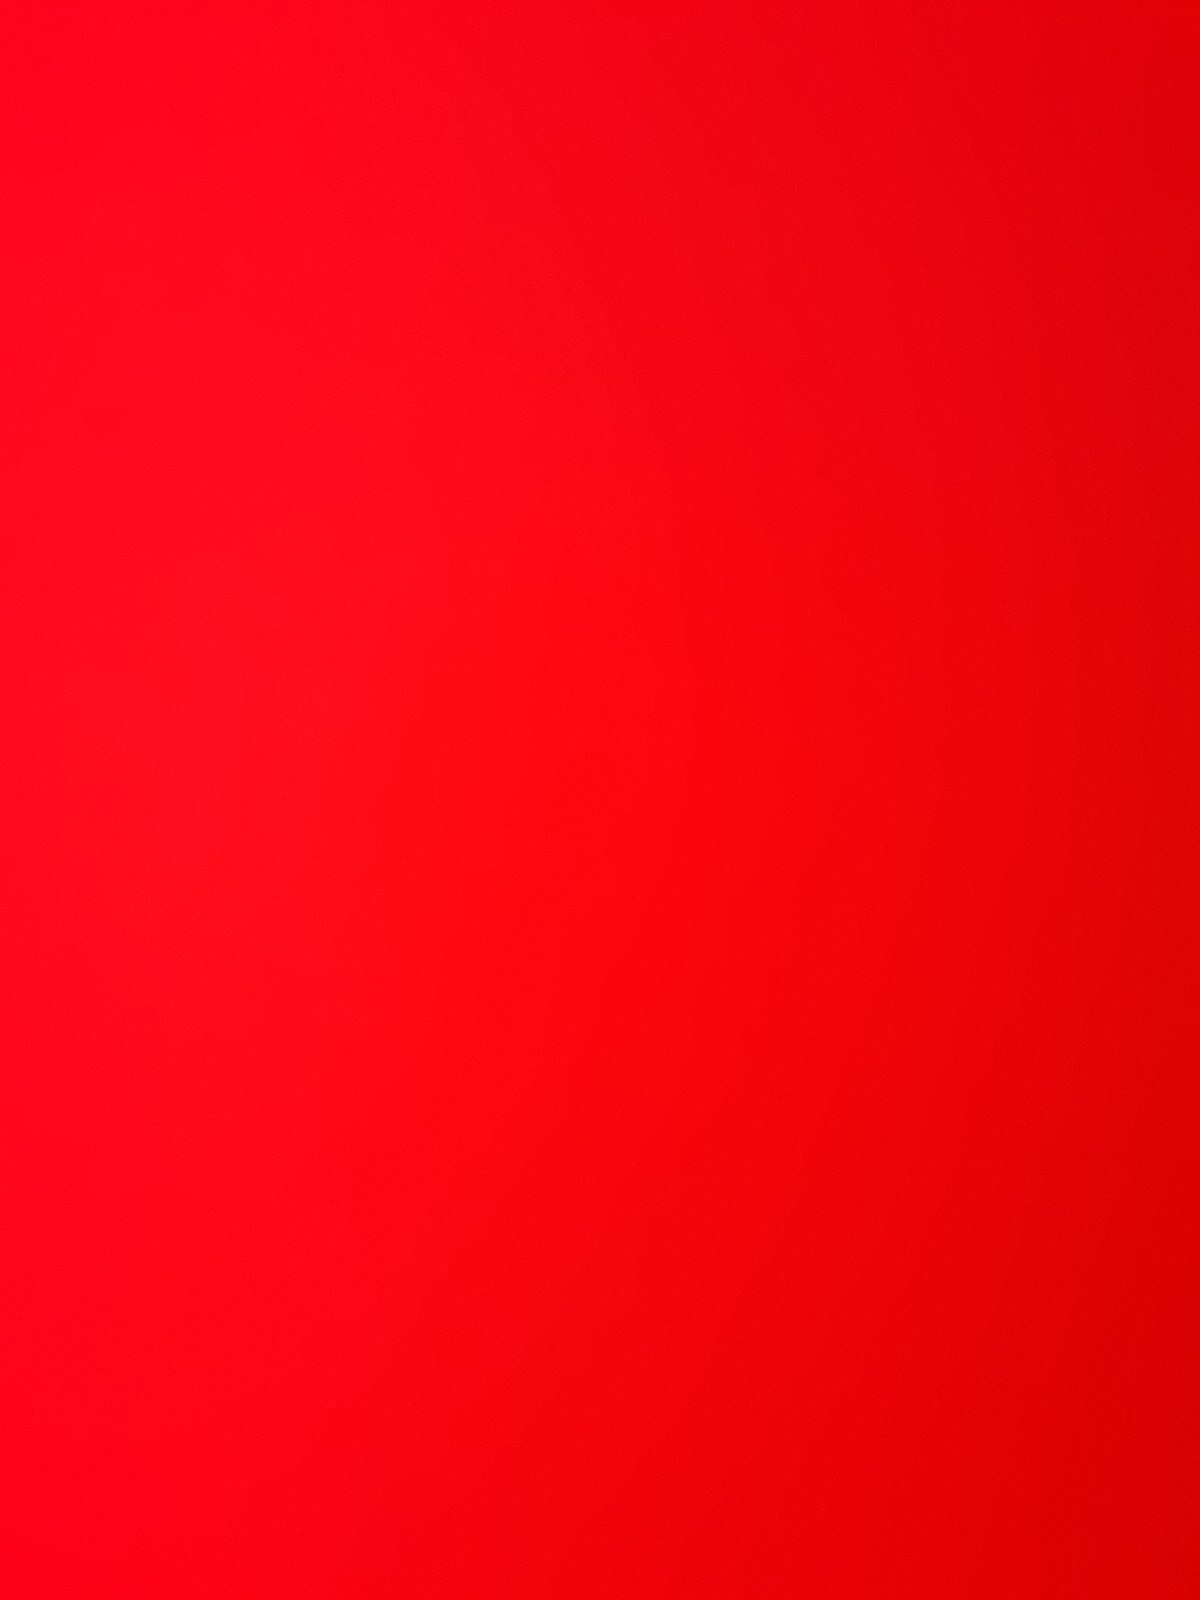 1200px-Red_Color.jpg